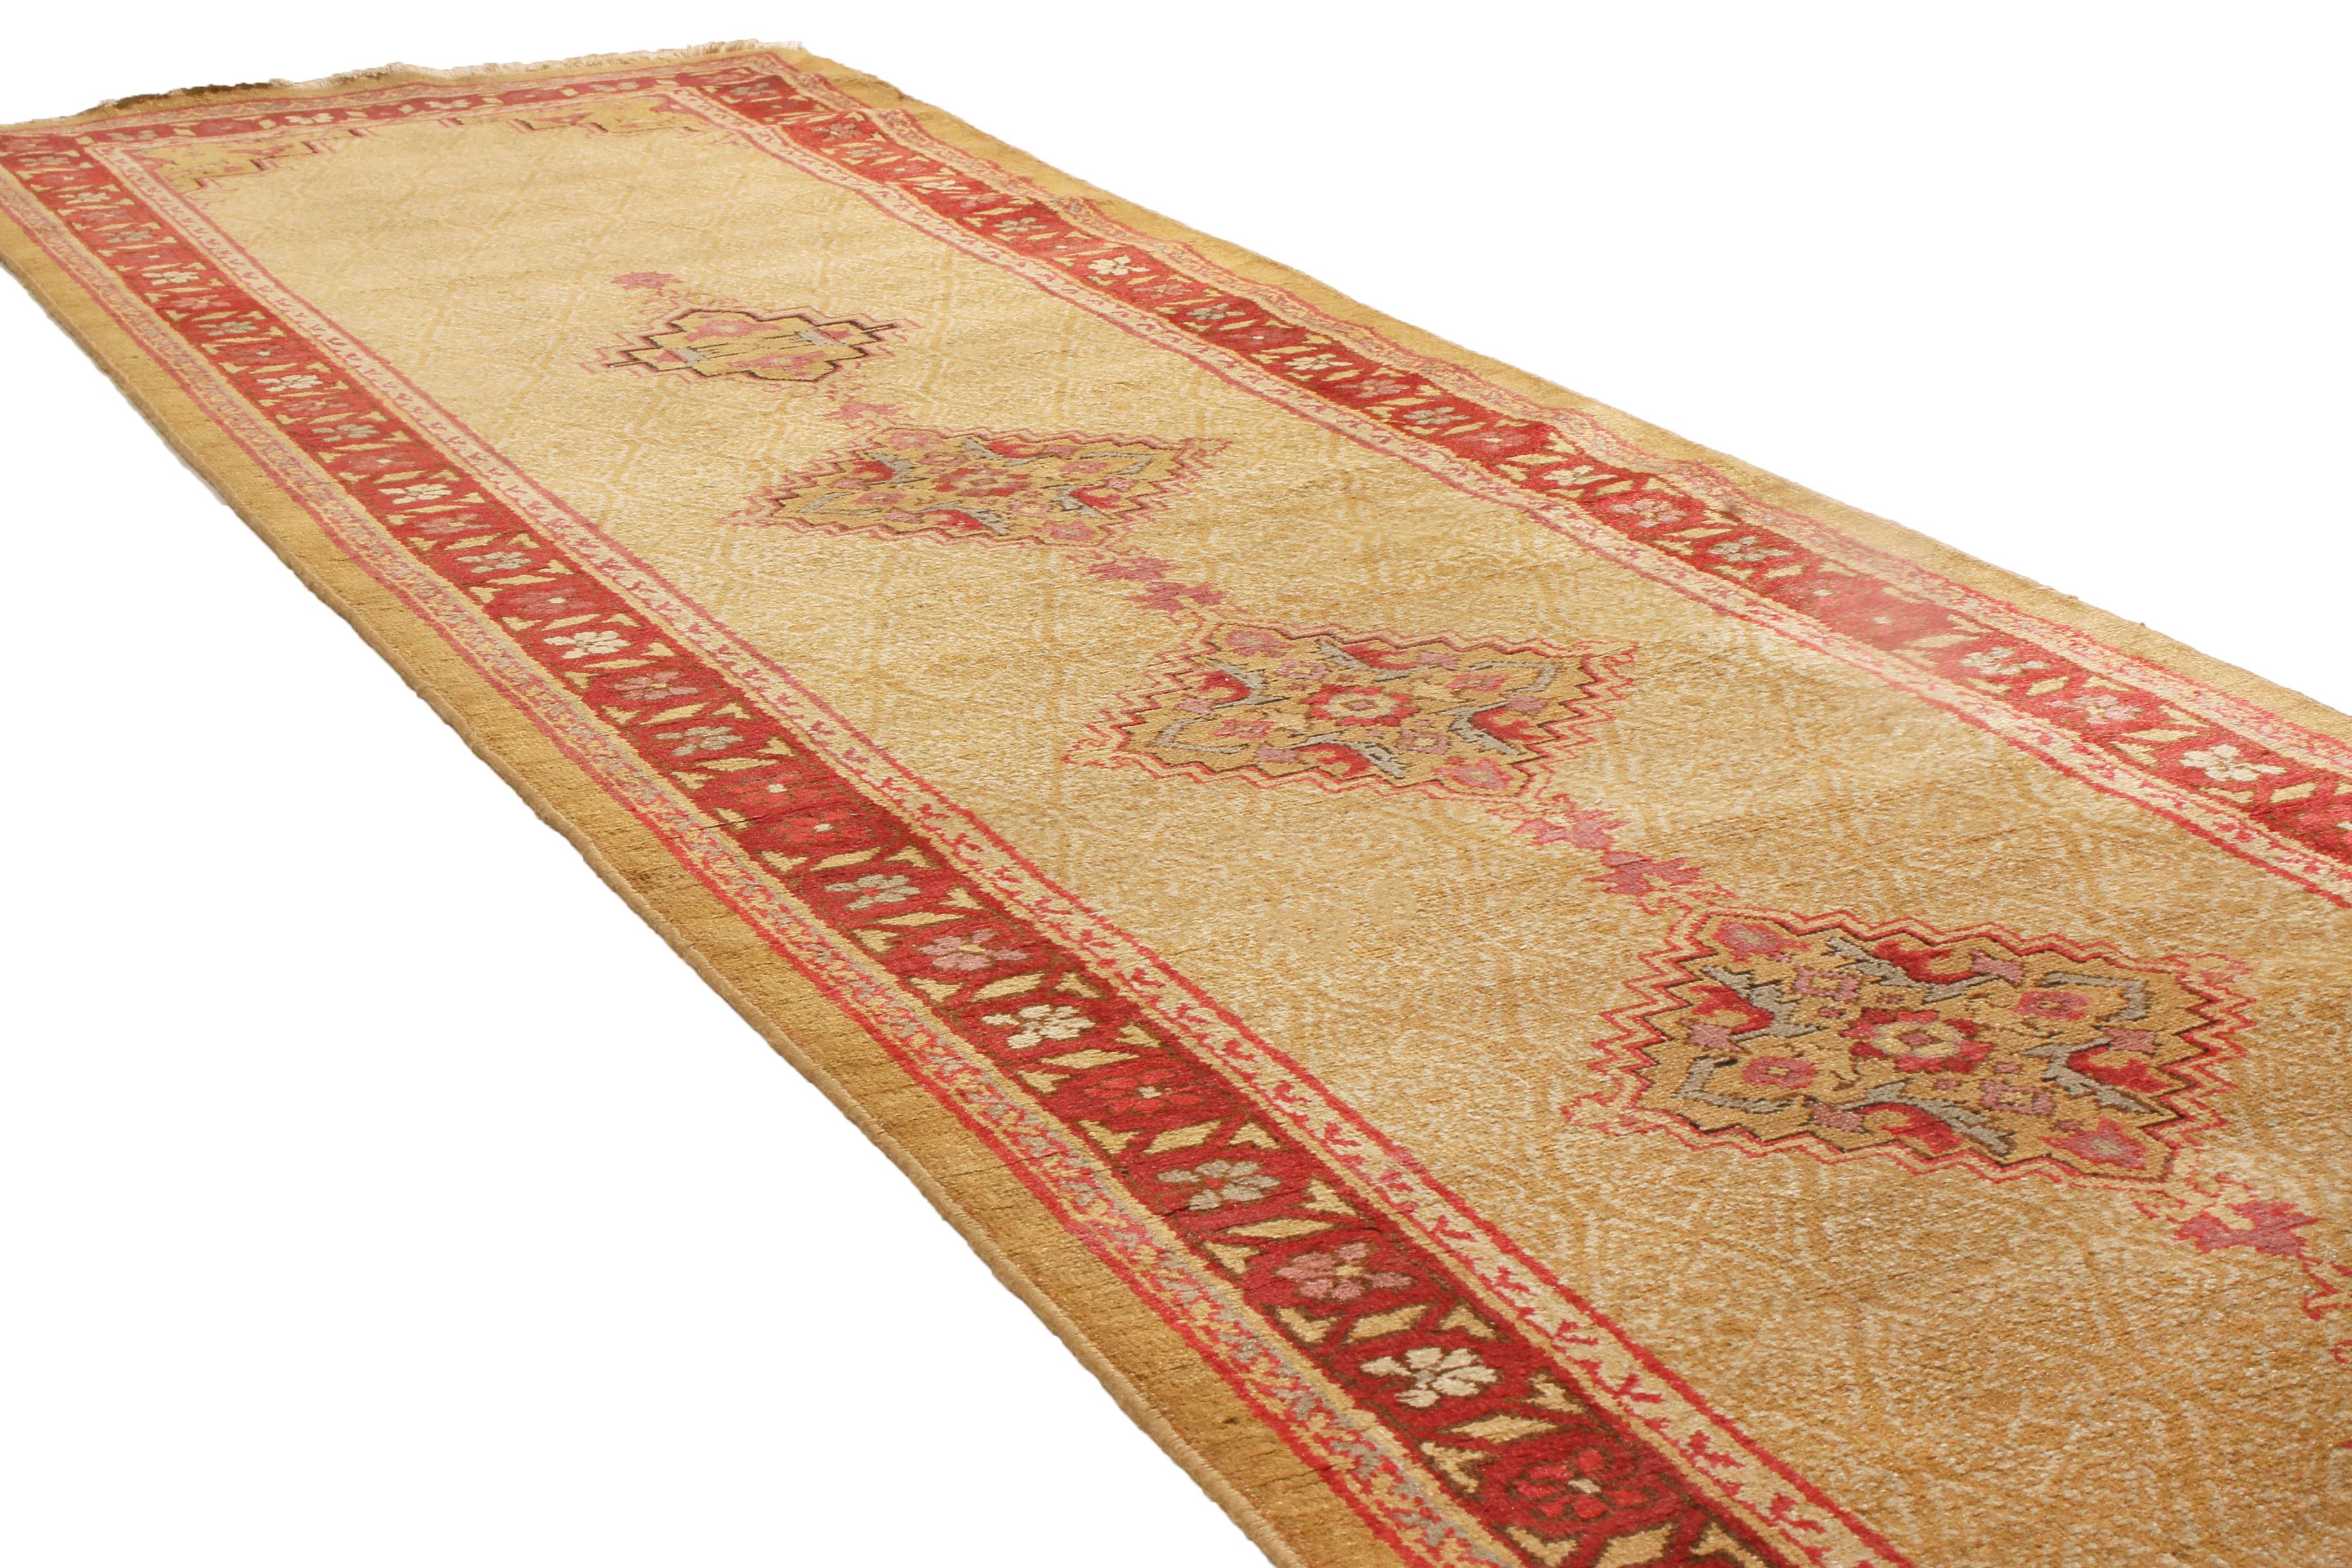 Indian Antique Agra Red and Tan Geometric-Floral Wool Runner by Rug & Kilim For Sale